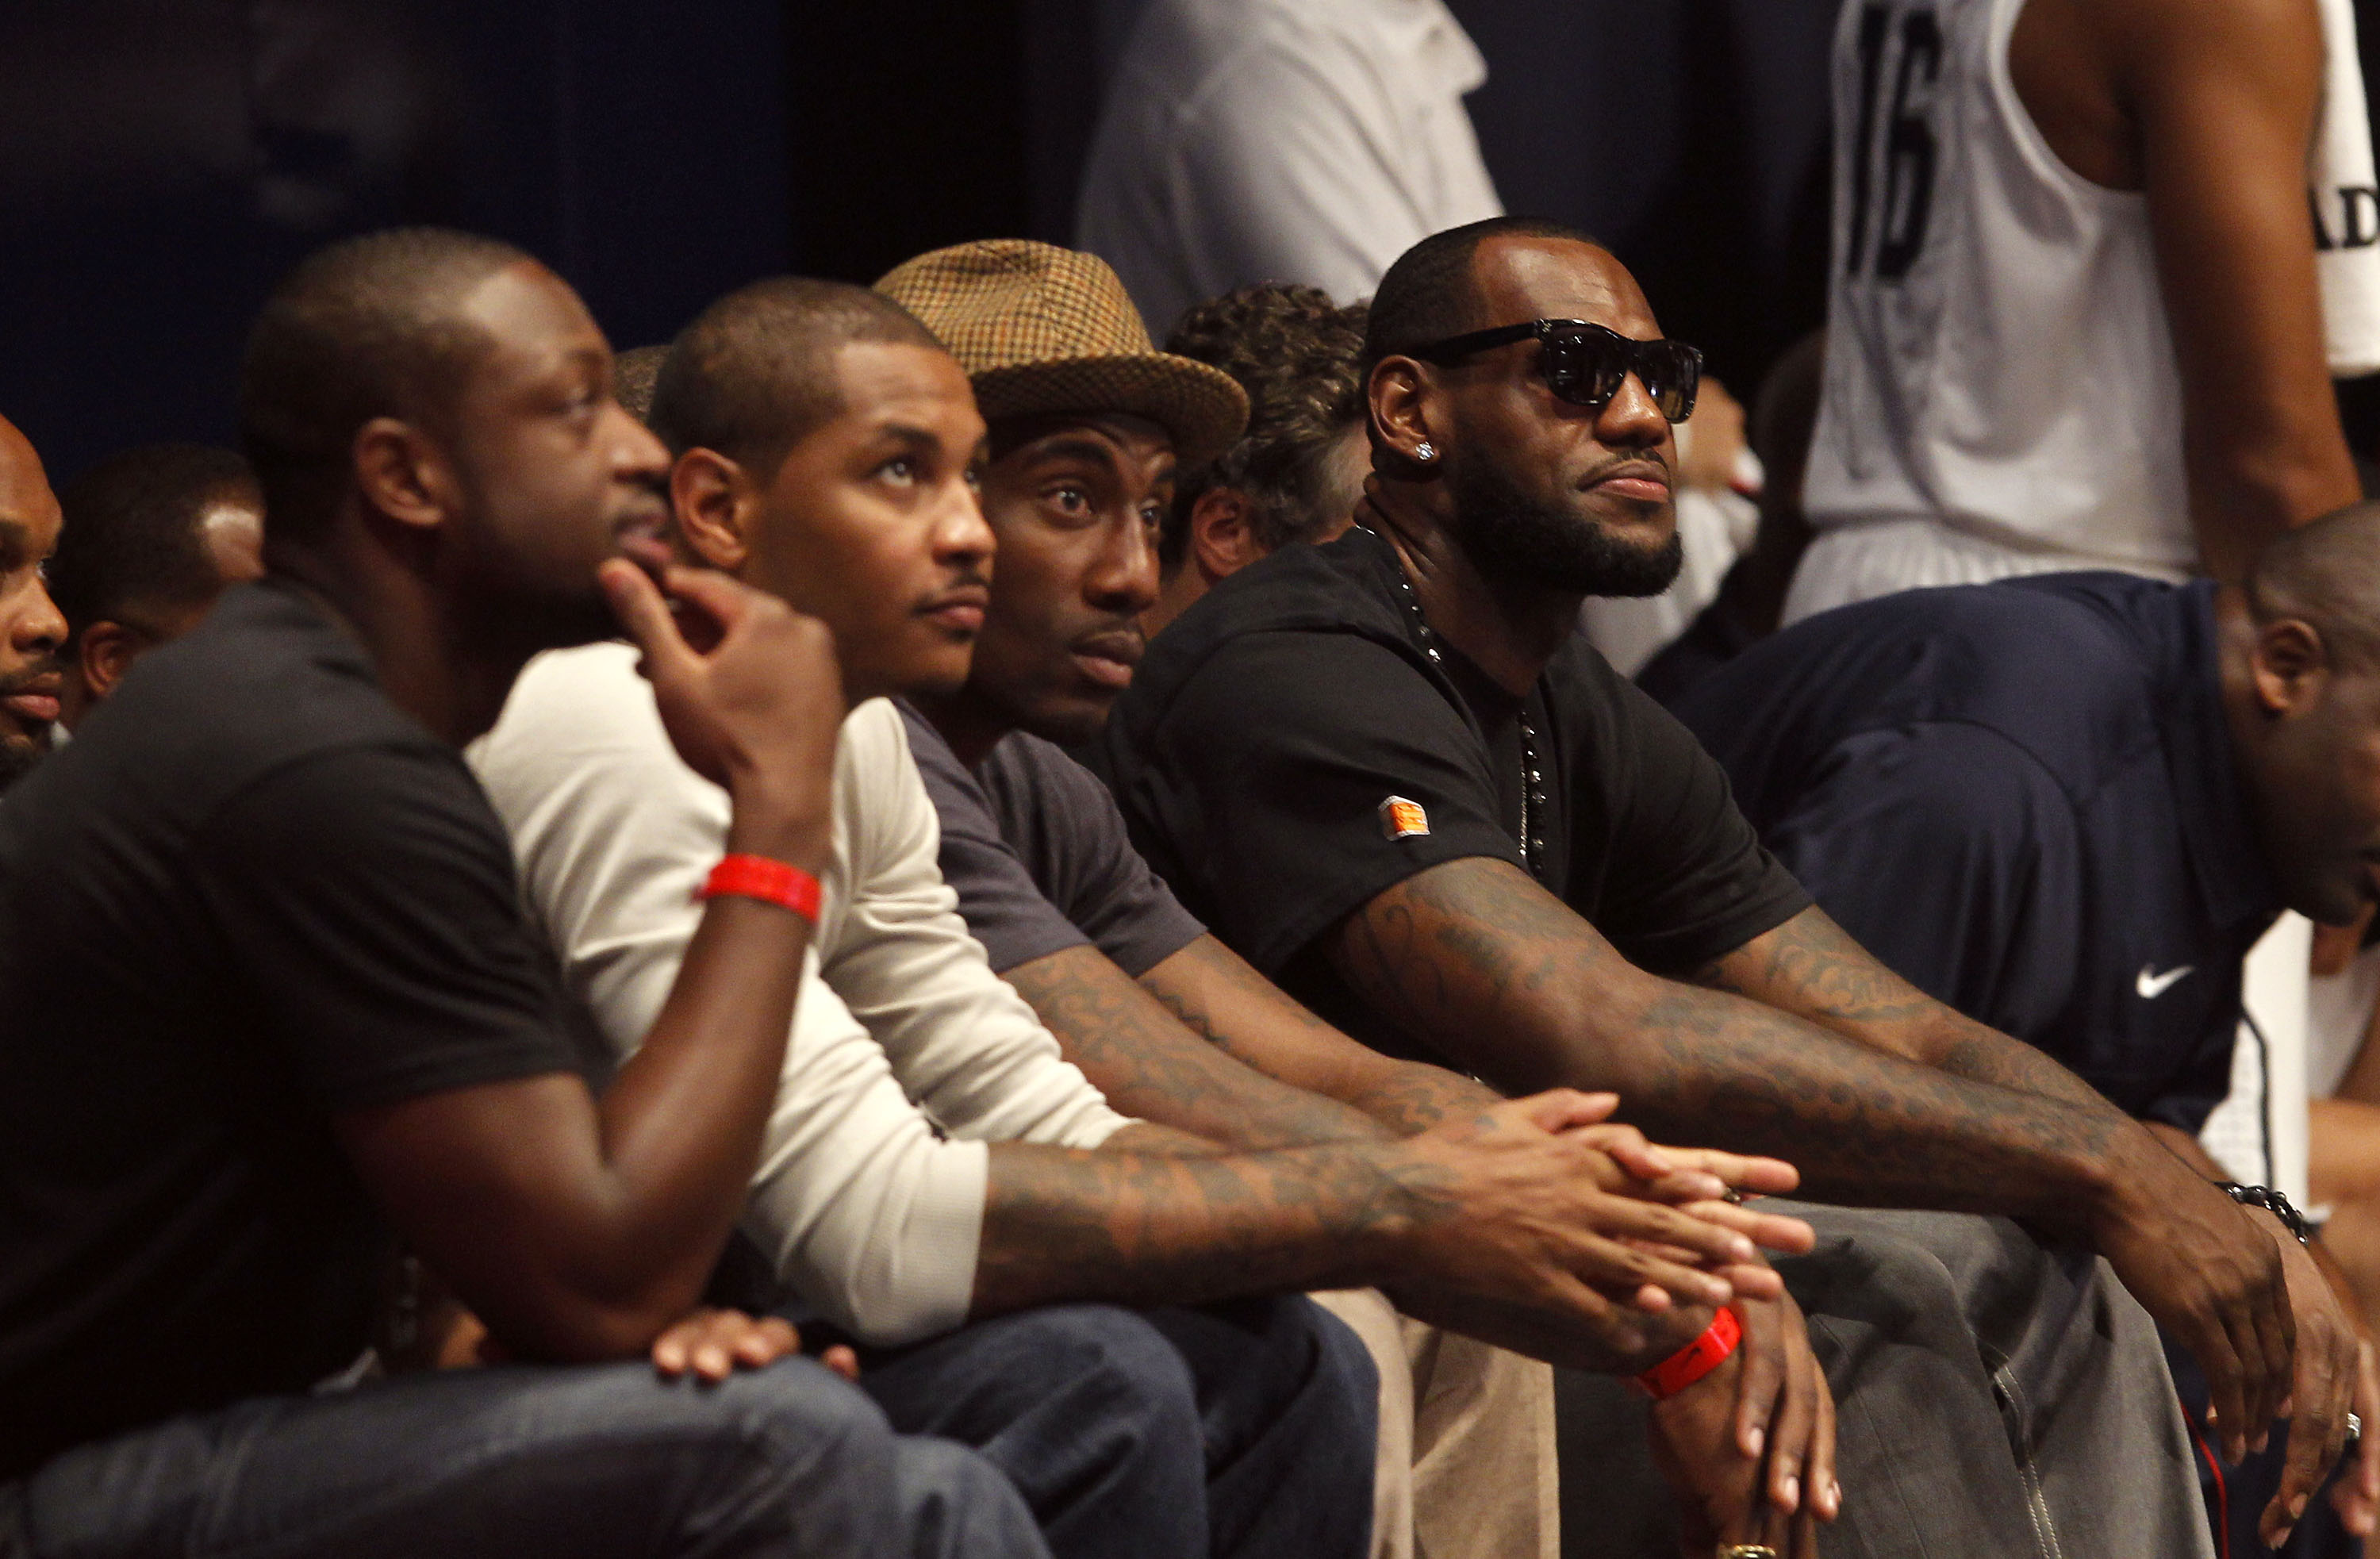 NEW YORK CITY, NY - AUGUST 12:  (L-R) Dwyane Wade, Carmelo Anthony, Amar'e Stoudemire and LeBron James look on during the World Basketball Festival USAB Showcase at Radio City Music Hall on August 12, 2010 in New York City.  (Photo by Chris Trotman/Getty